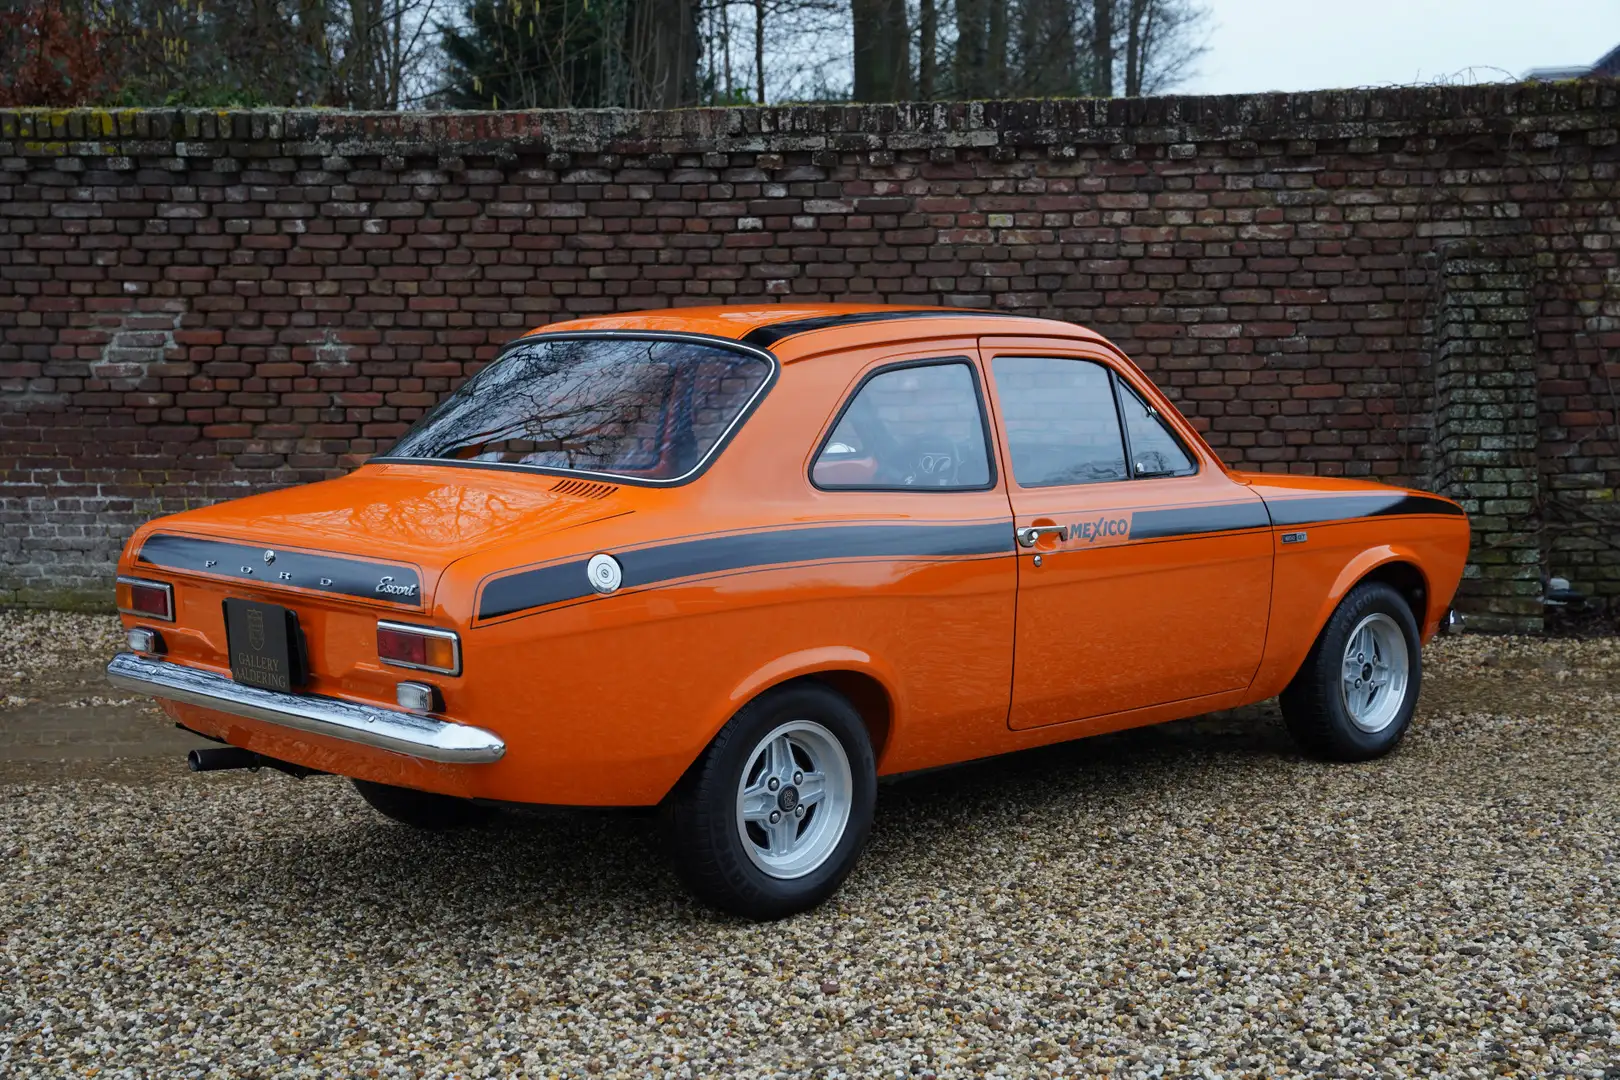 Ford Escort RS Mexico 1600 GT Mk1 Delivered new in Switzerland Naranja - 2